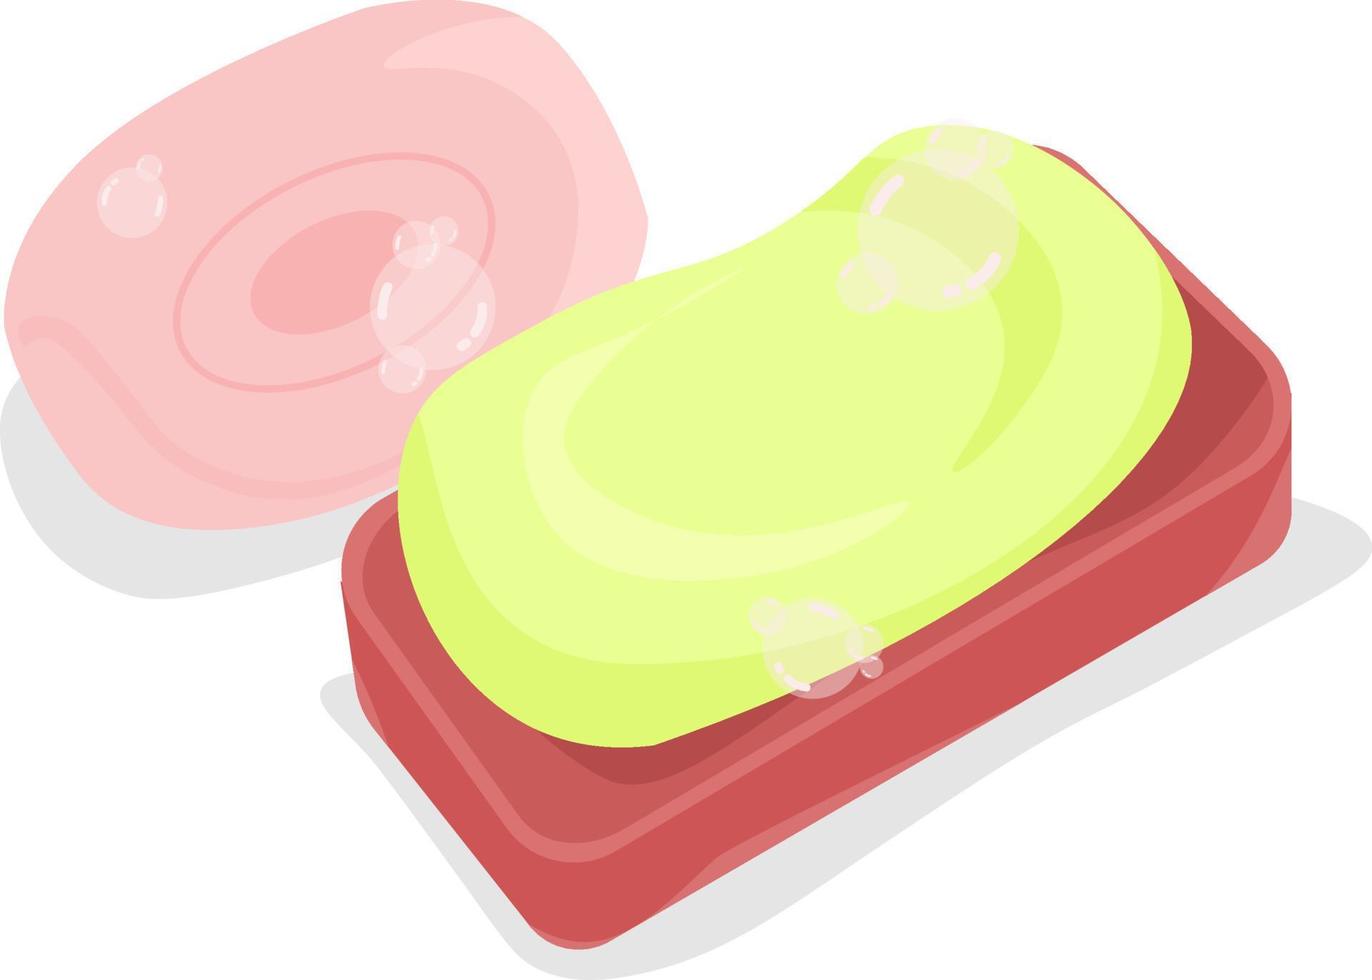 Two soaps, illustration, vector on white background